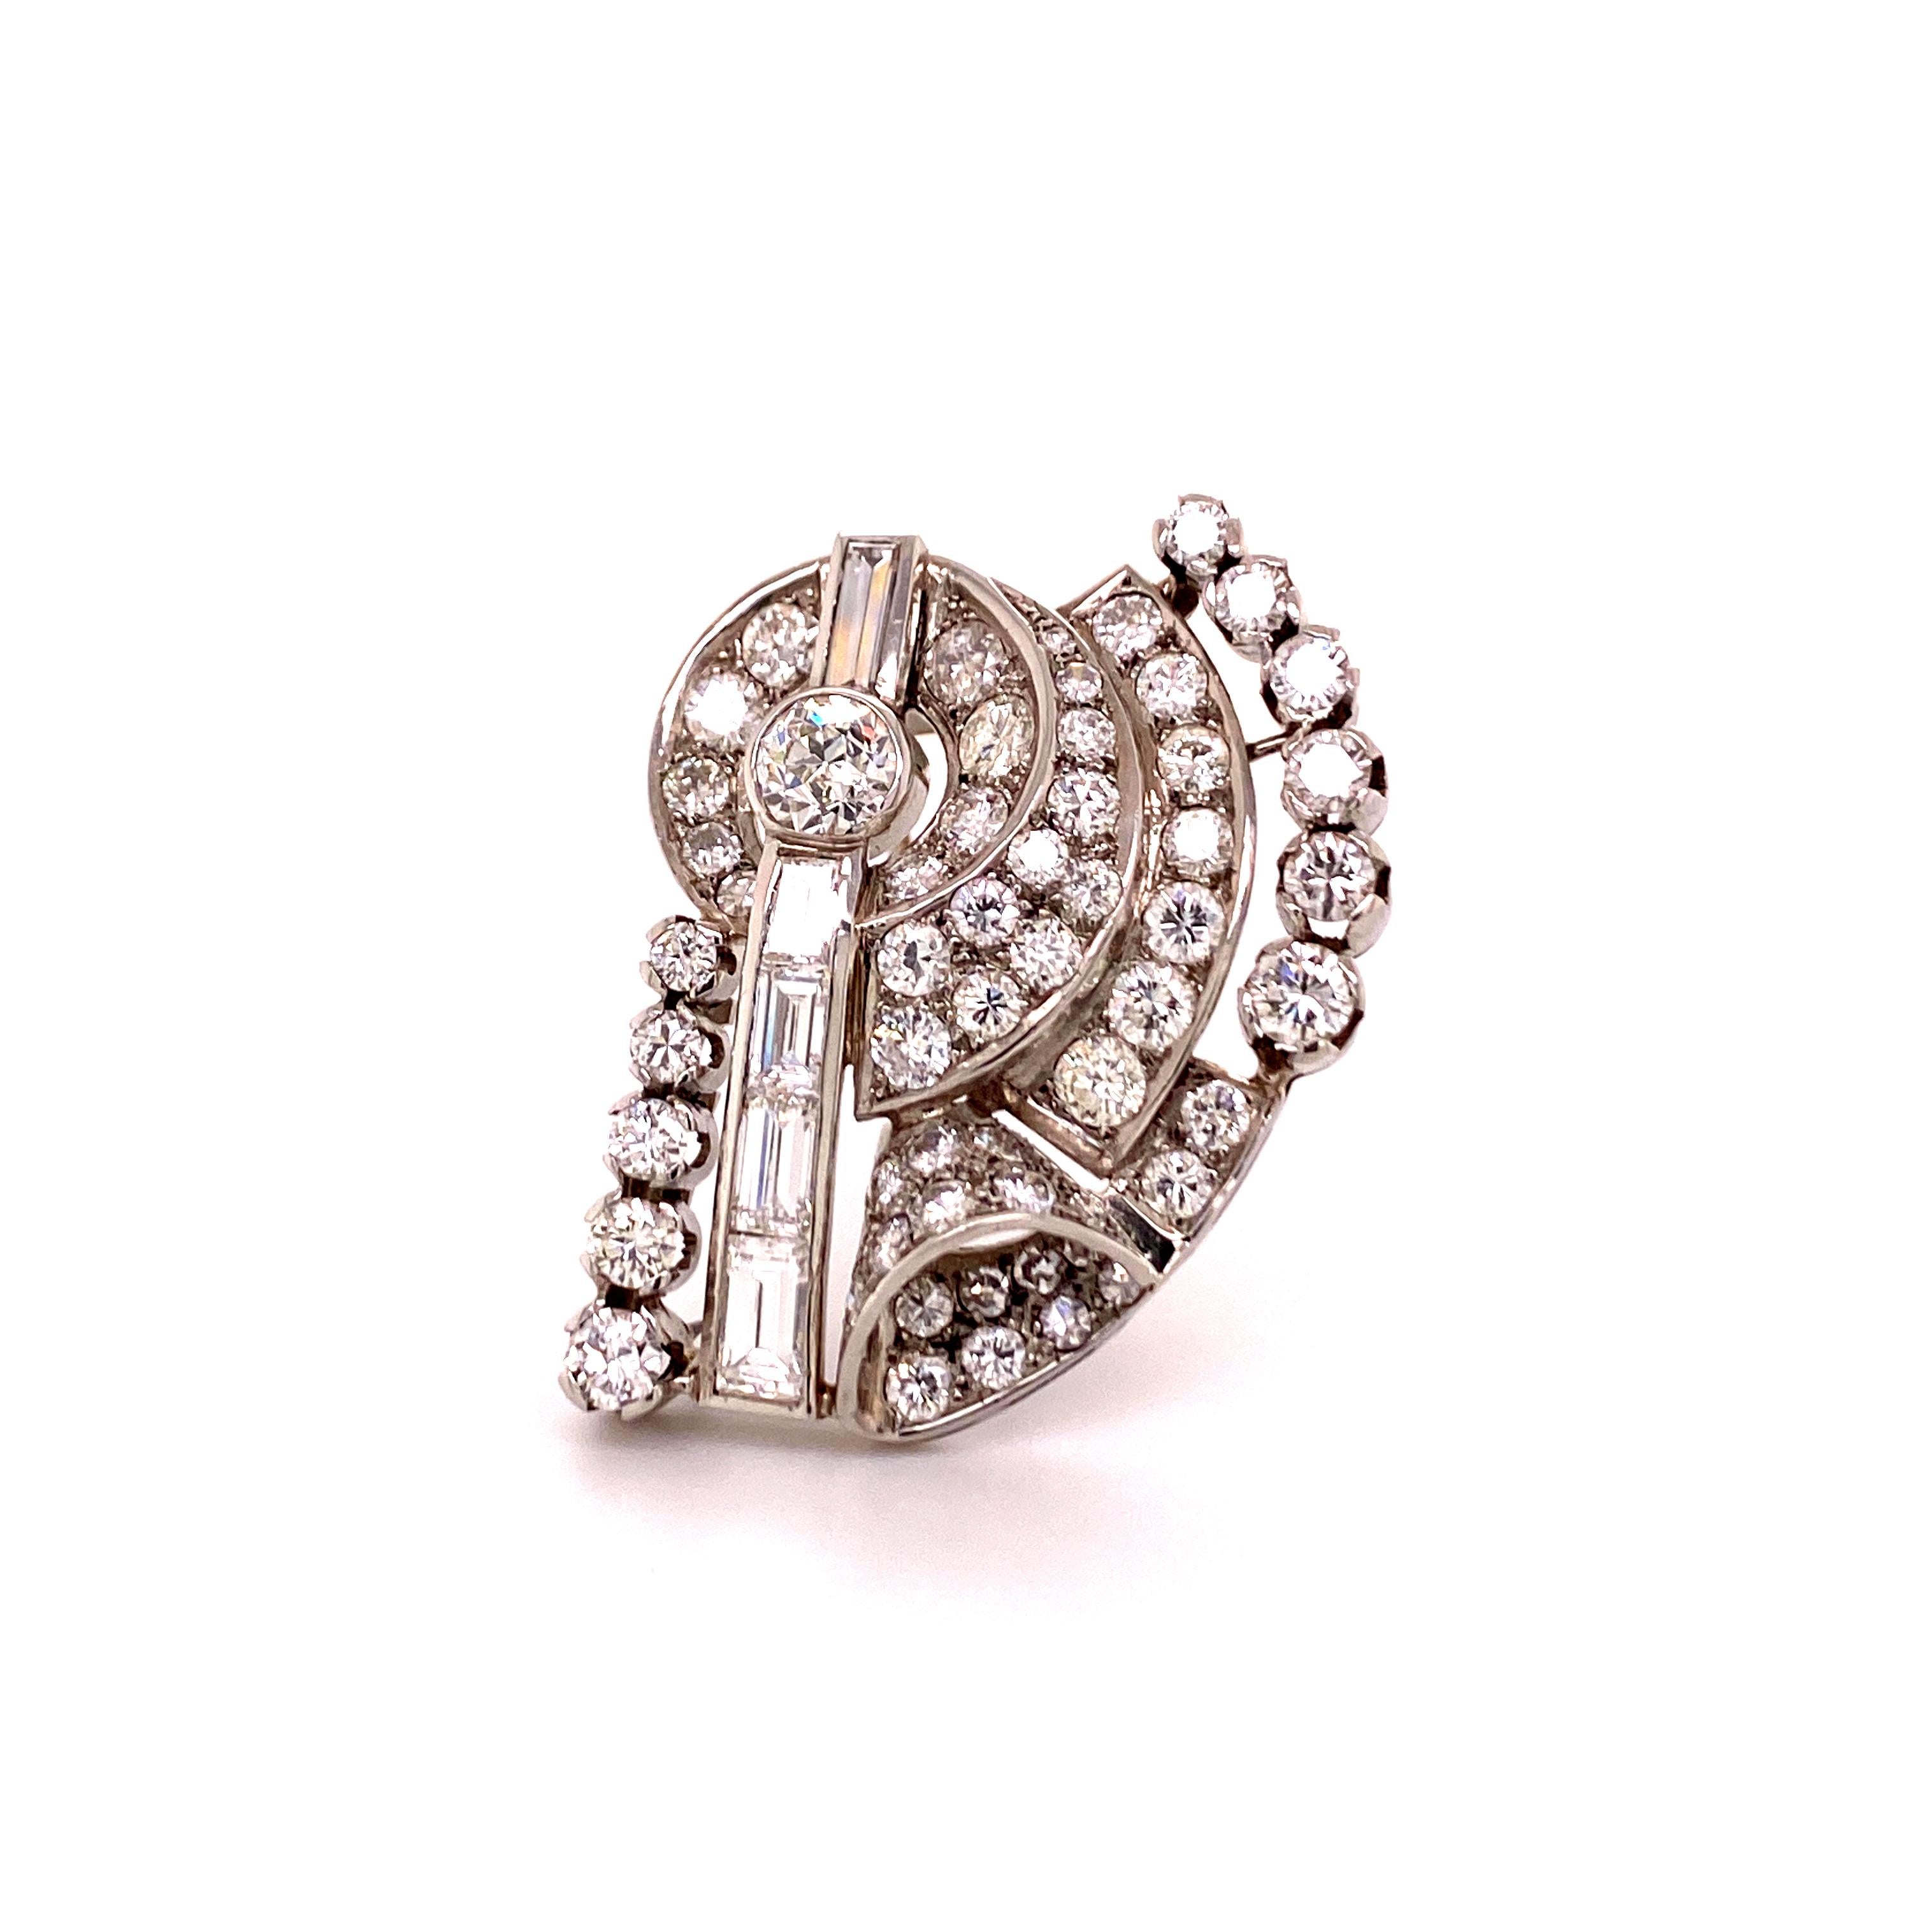 Designed as an artistic motive with curved and straight elements. The clip is given a Snail shell look by it’s grain and prong set spiral components. At the peak of the shell sits a 0.72 ct old European-cut diamond of I/J-si1 quality. The pattern is